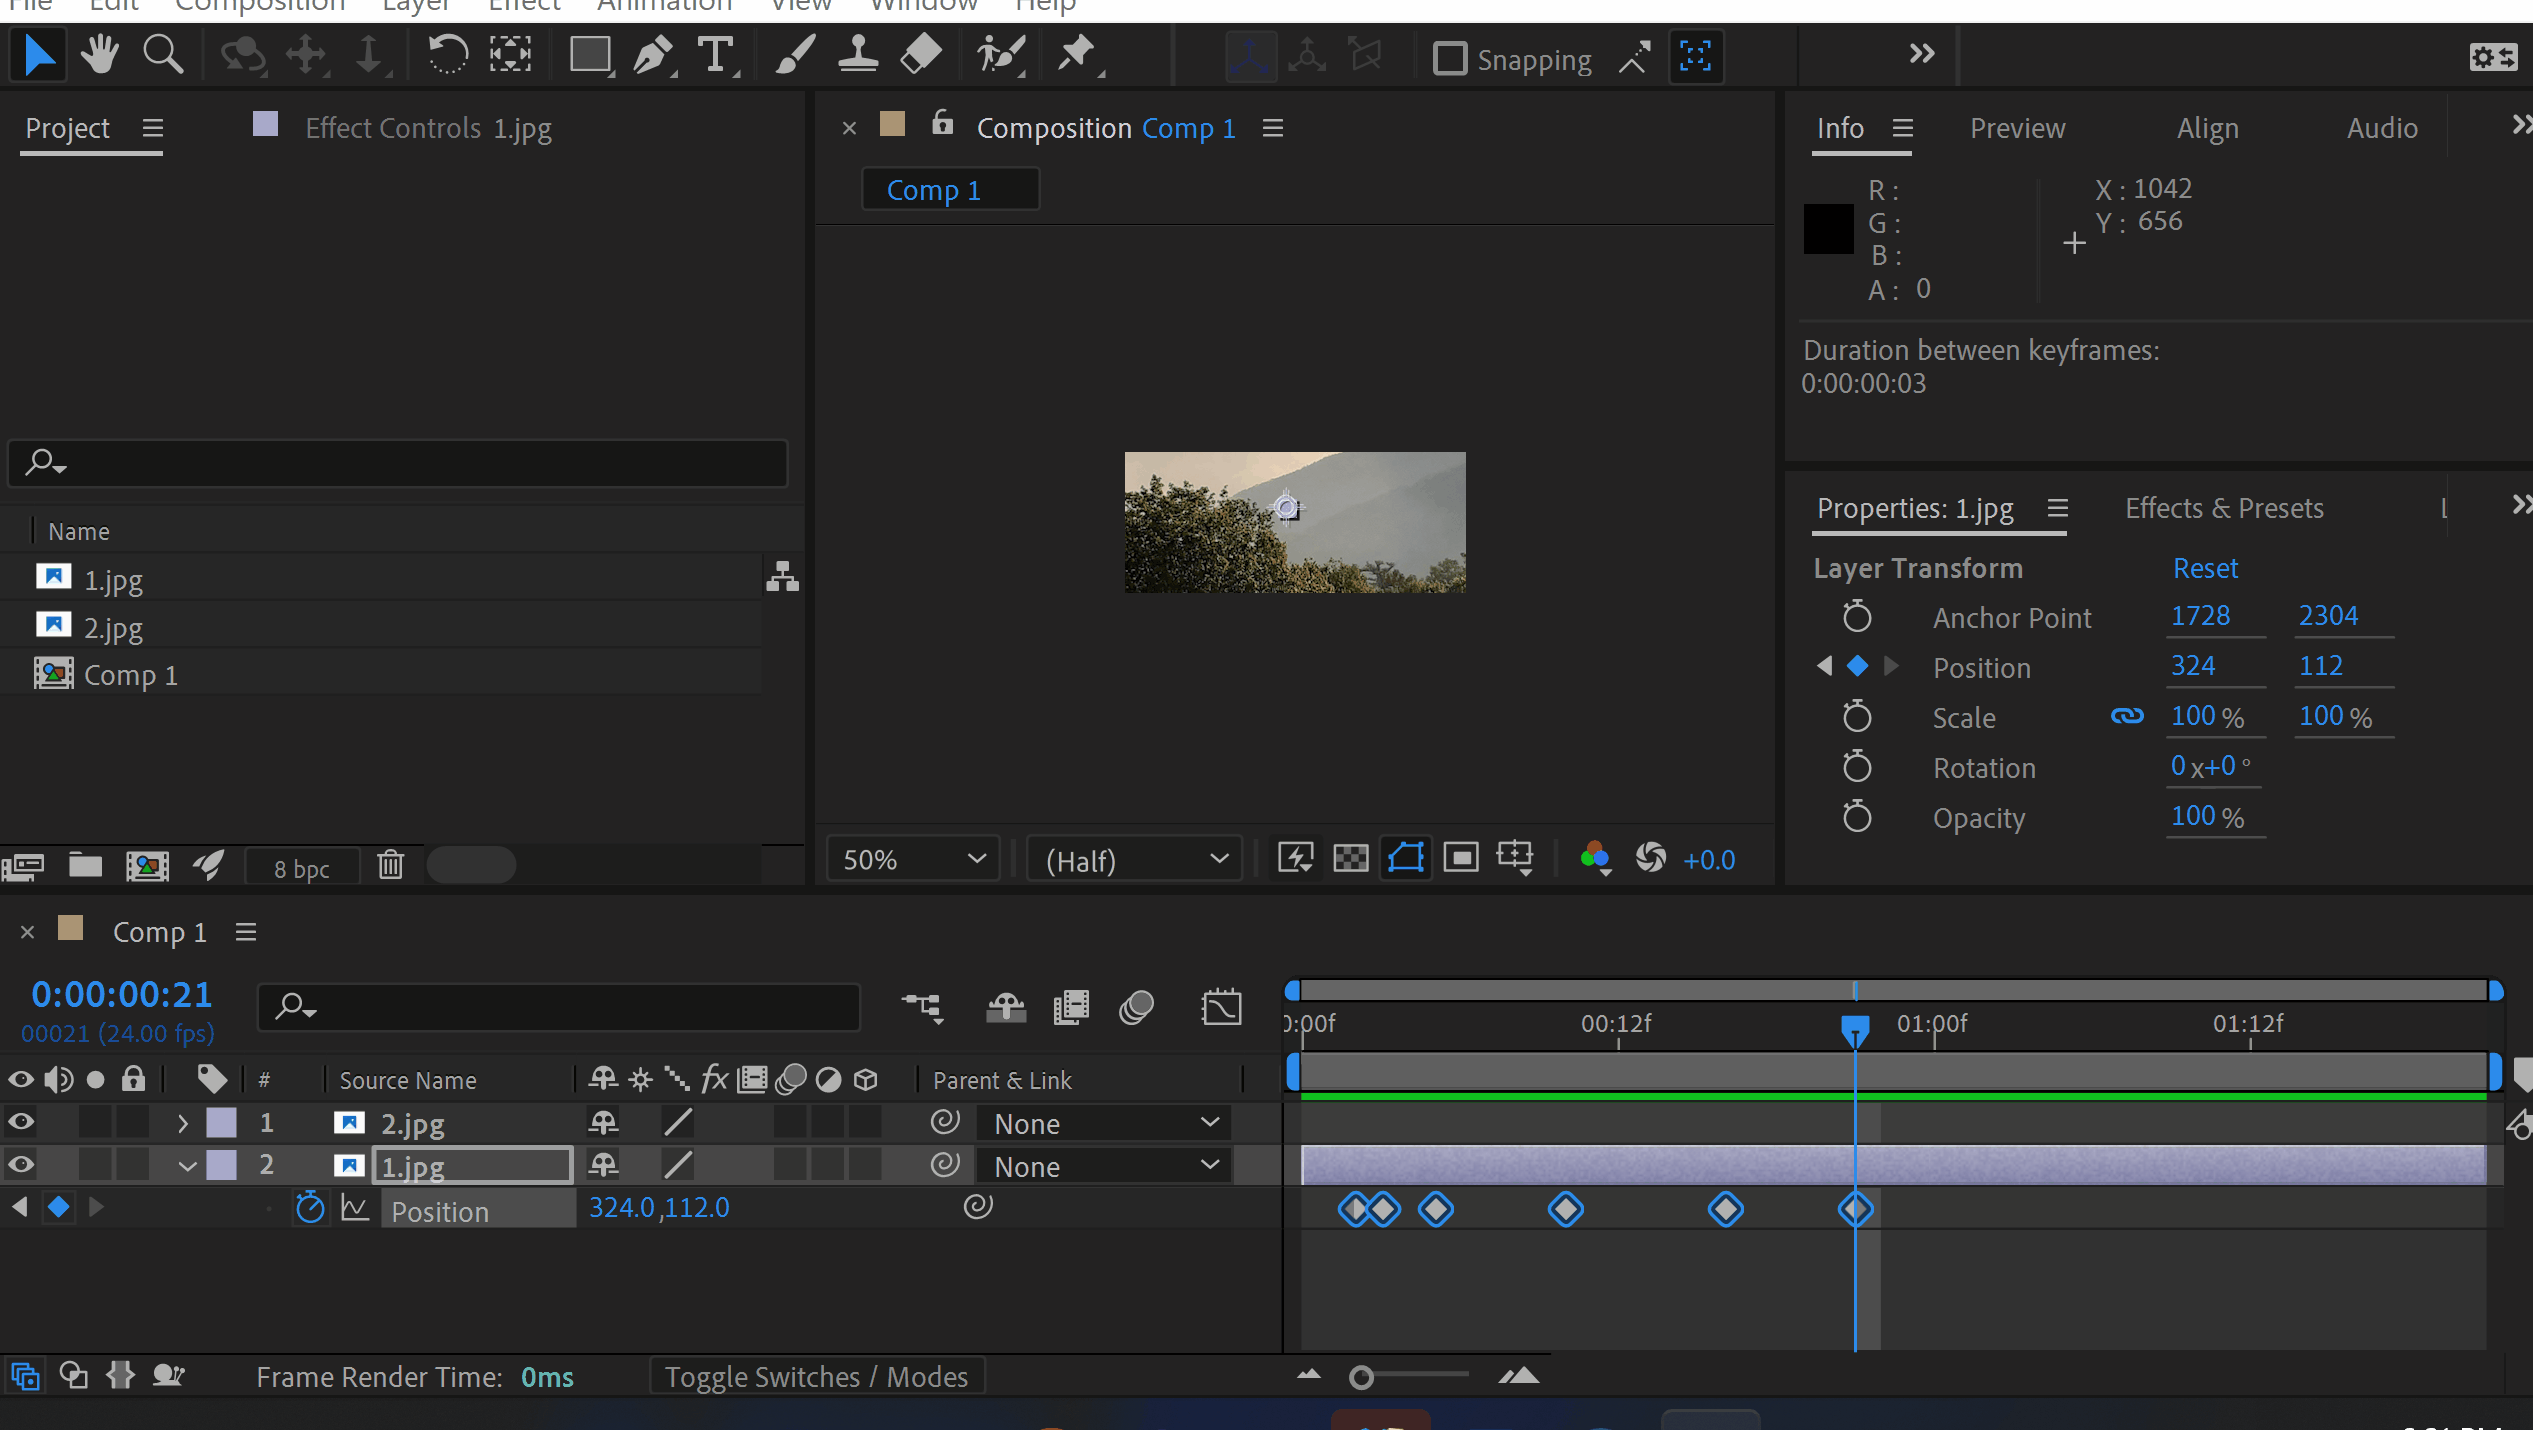 How to Make a GIF in After Effects - AEJuice